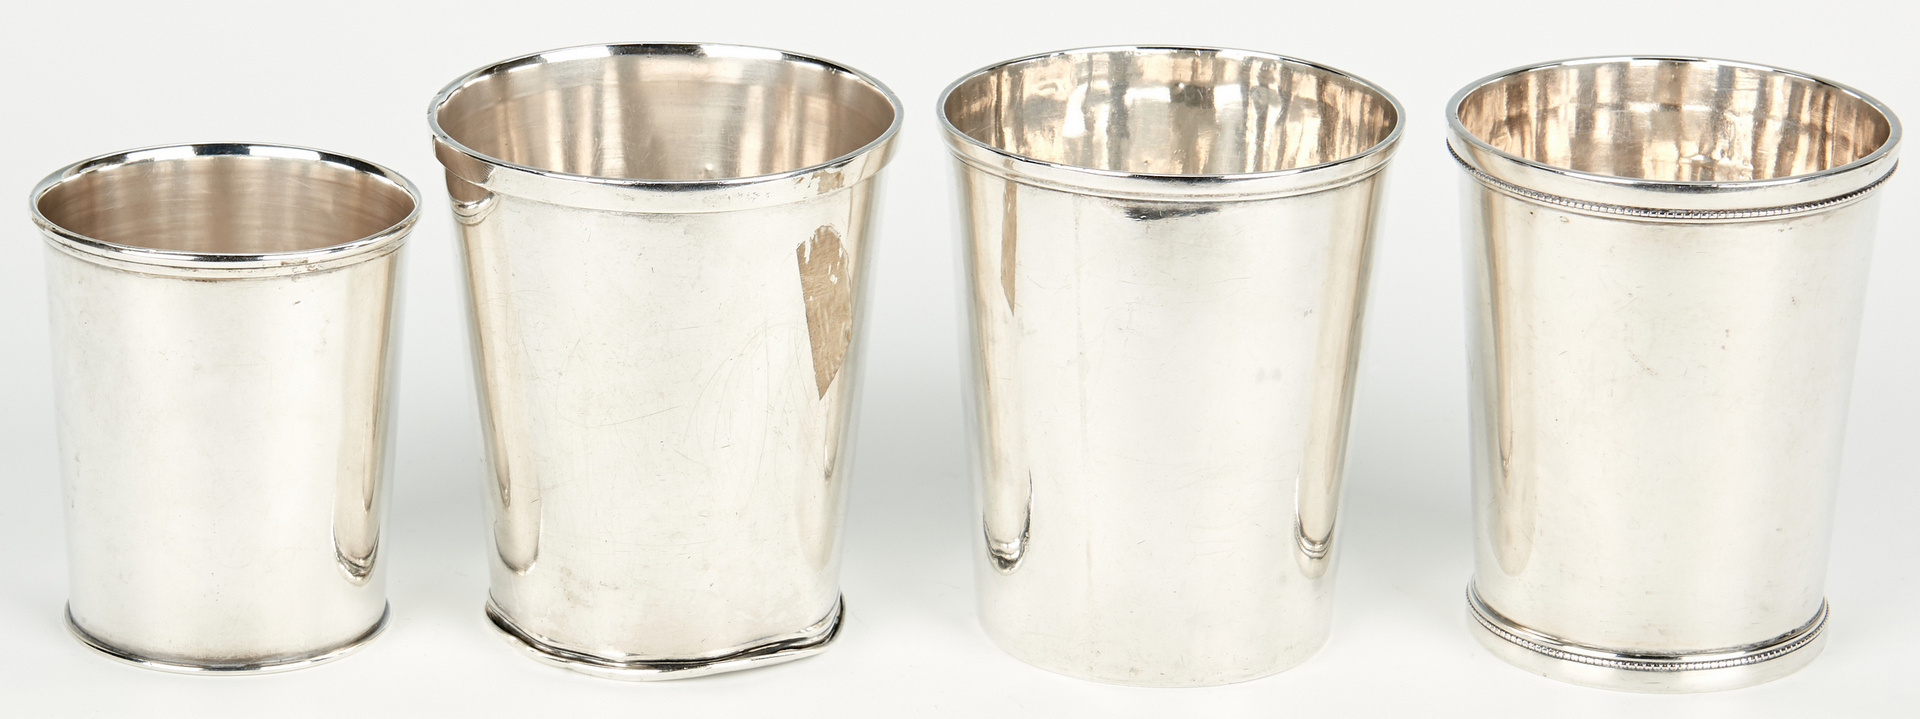 Lot 63: 4 Coin Silver Julep Cups, incl. KY